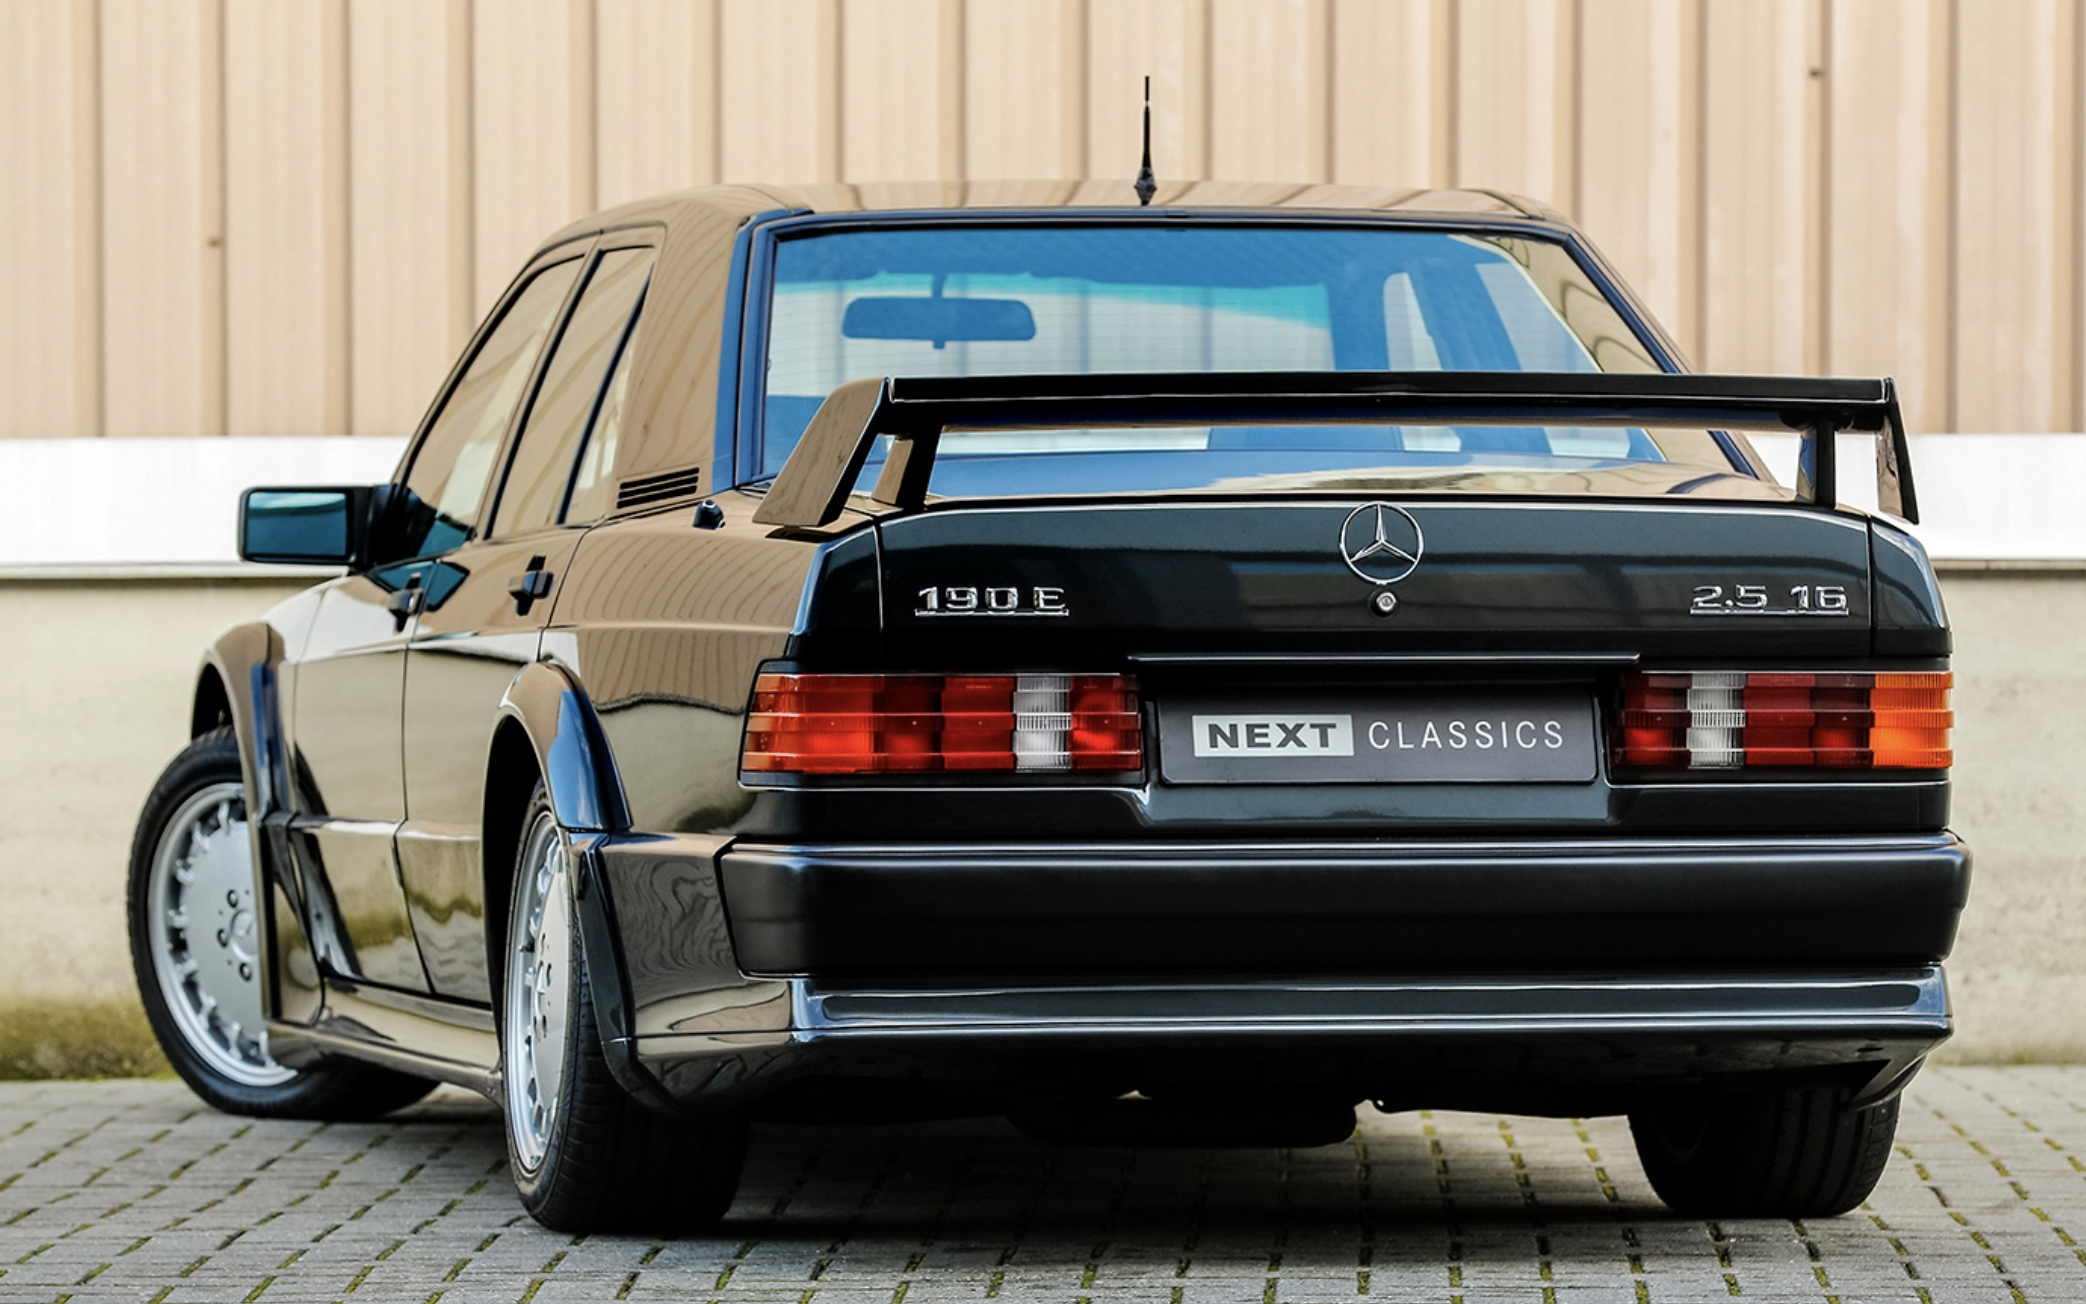 Mercedes-Benz 190E 2.5–16 Evo II: The Story of the Cosworth